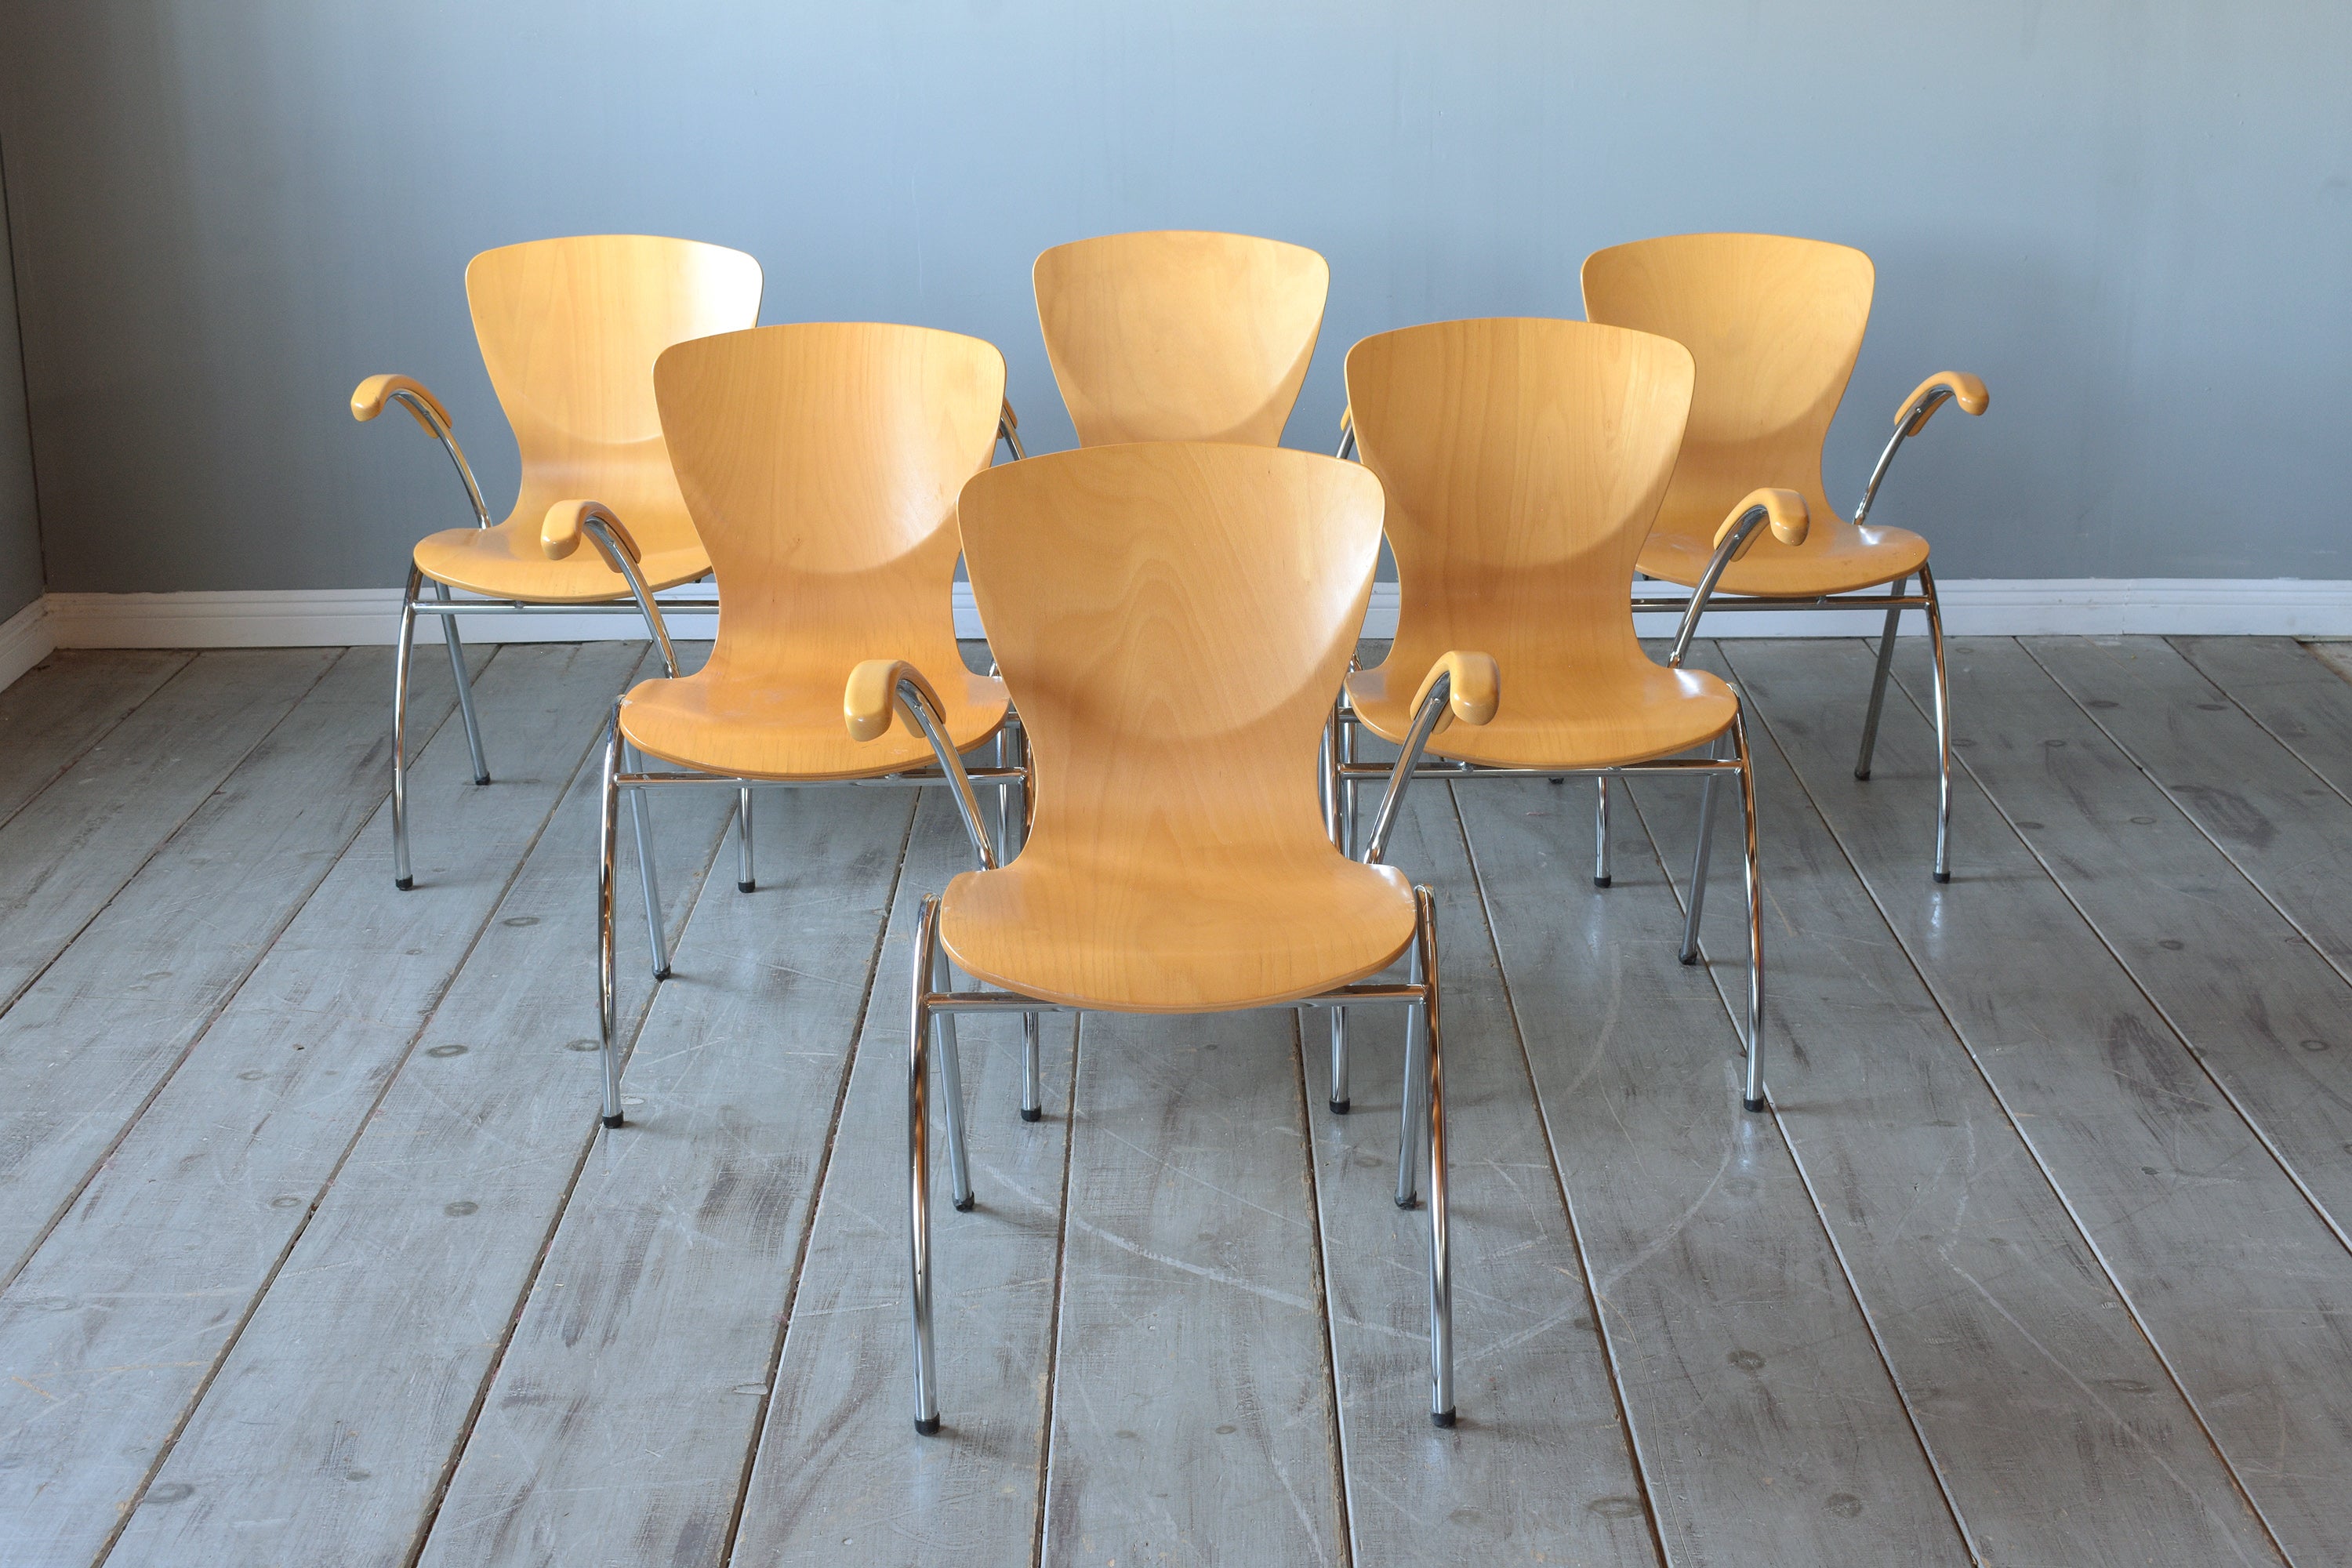 Elevate your dining experience with our exceptional set of six 21st-century mid-century modern dining chairs, a perfect blend of contemporary design and classic mid-century style. These chairs have been hand-crafted from high-quality beech wood and